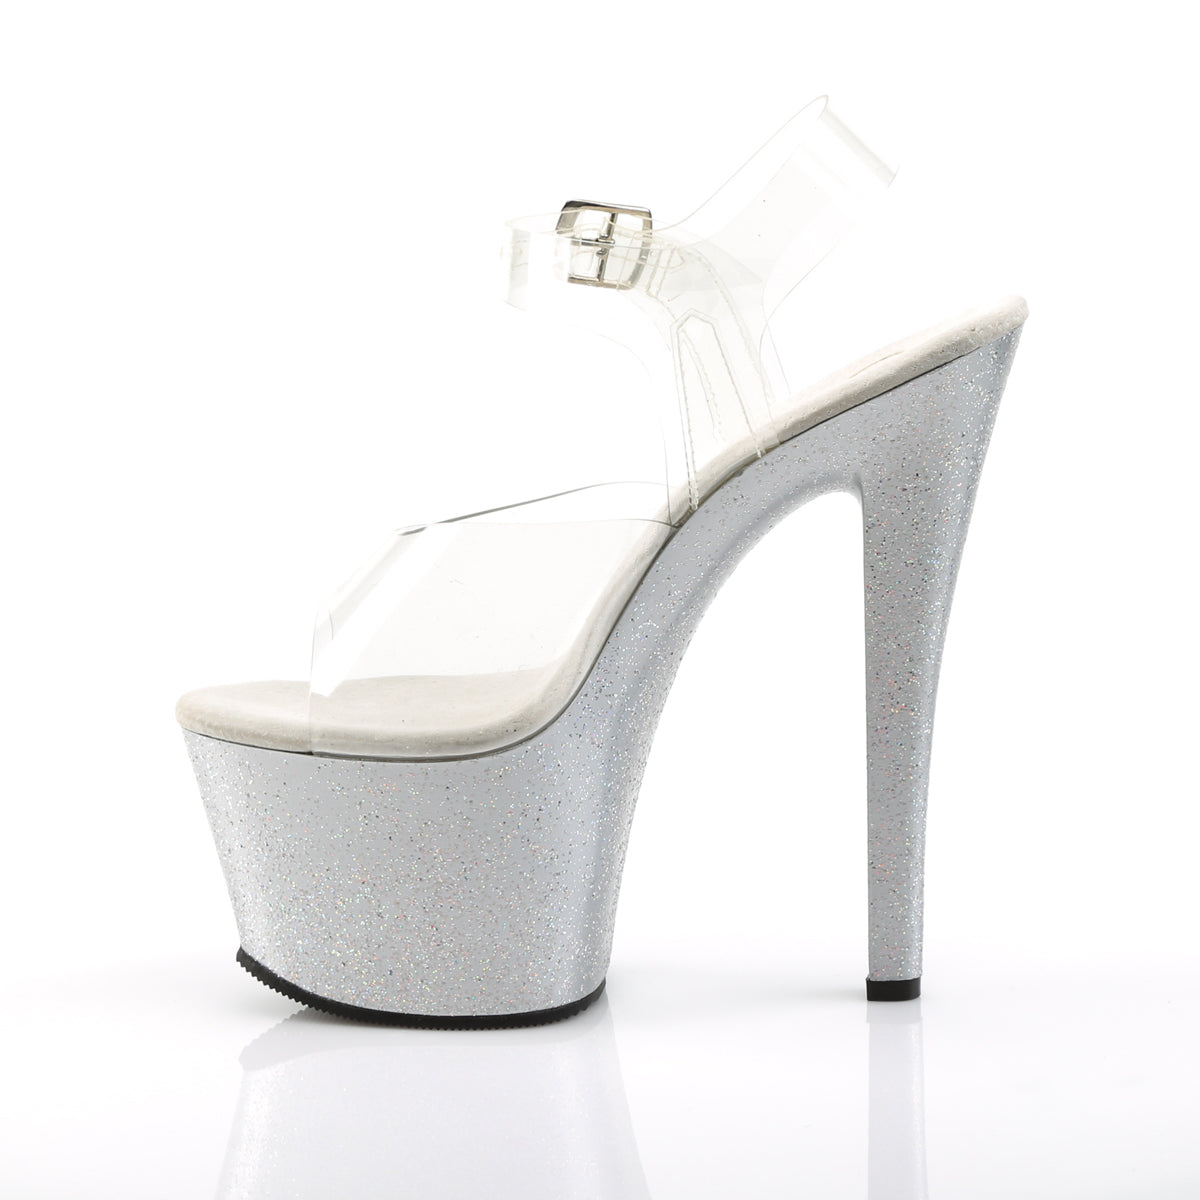 SKY-308MG 7" Heel Clear and Silver Pole Dancing Platforms-Pleaser- Sexy Shoes Pole Dance Heels